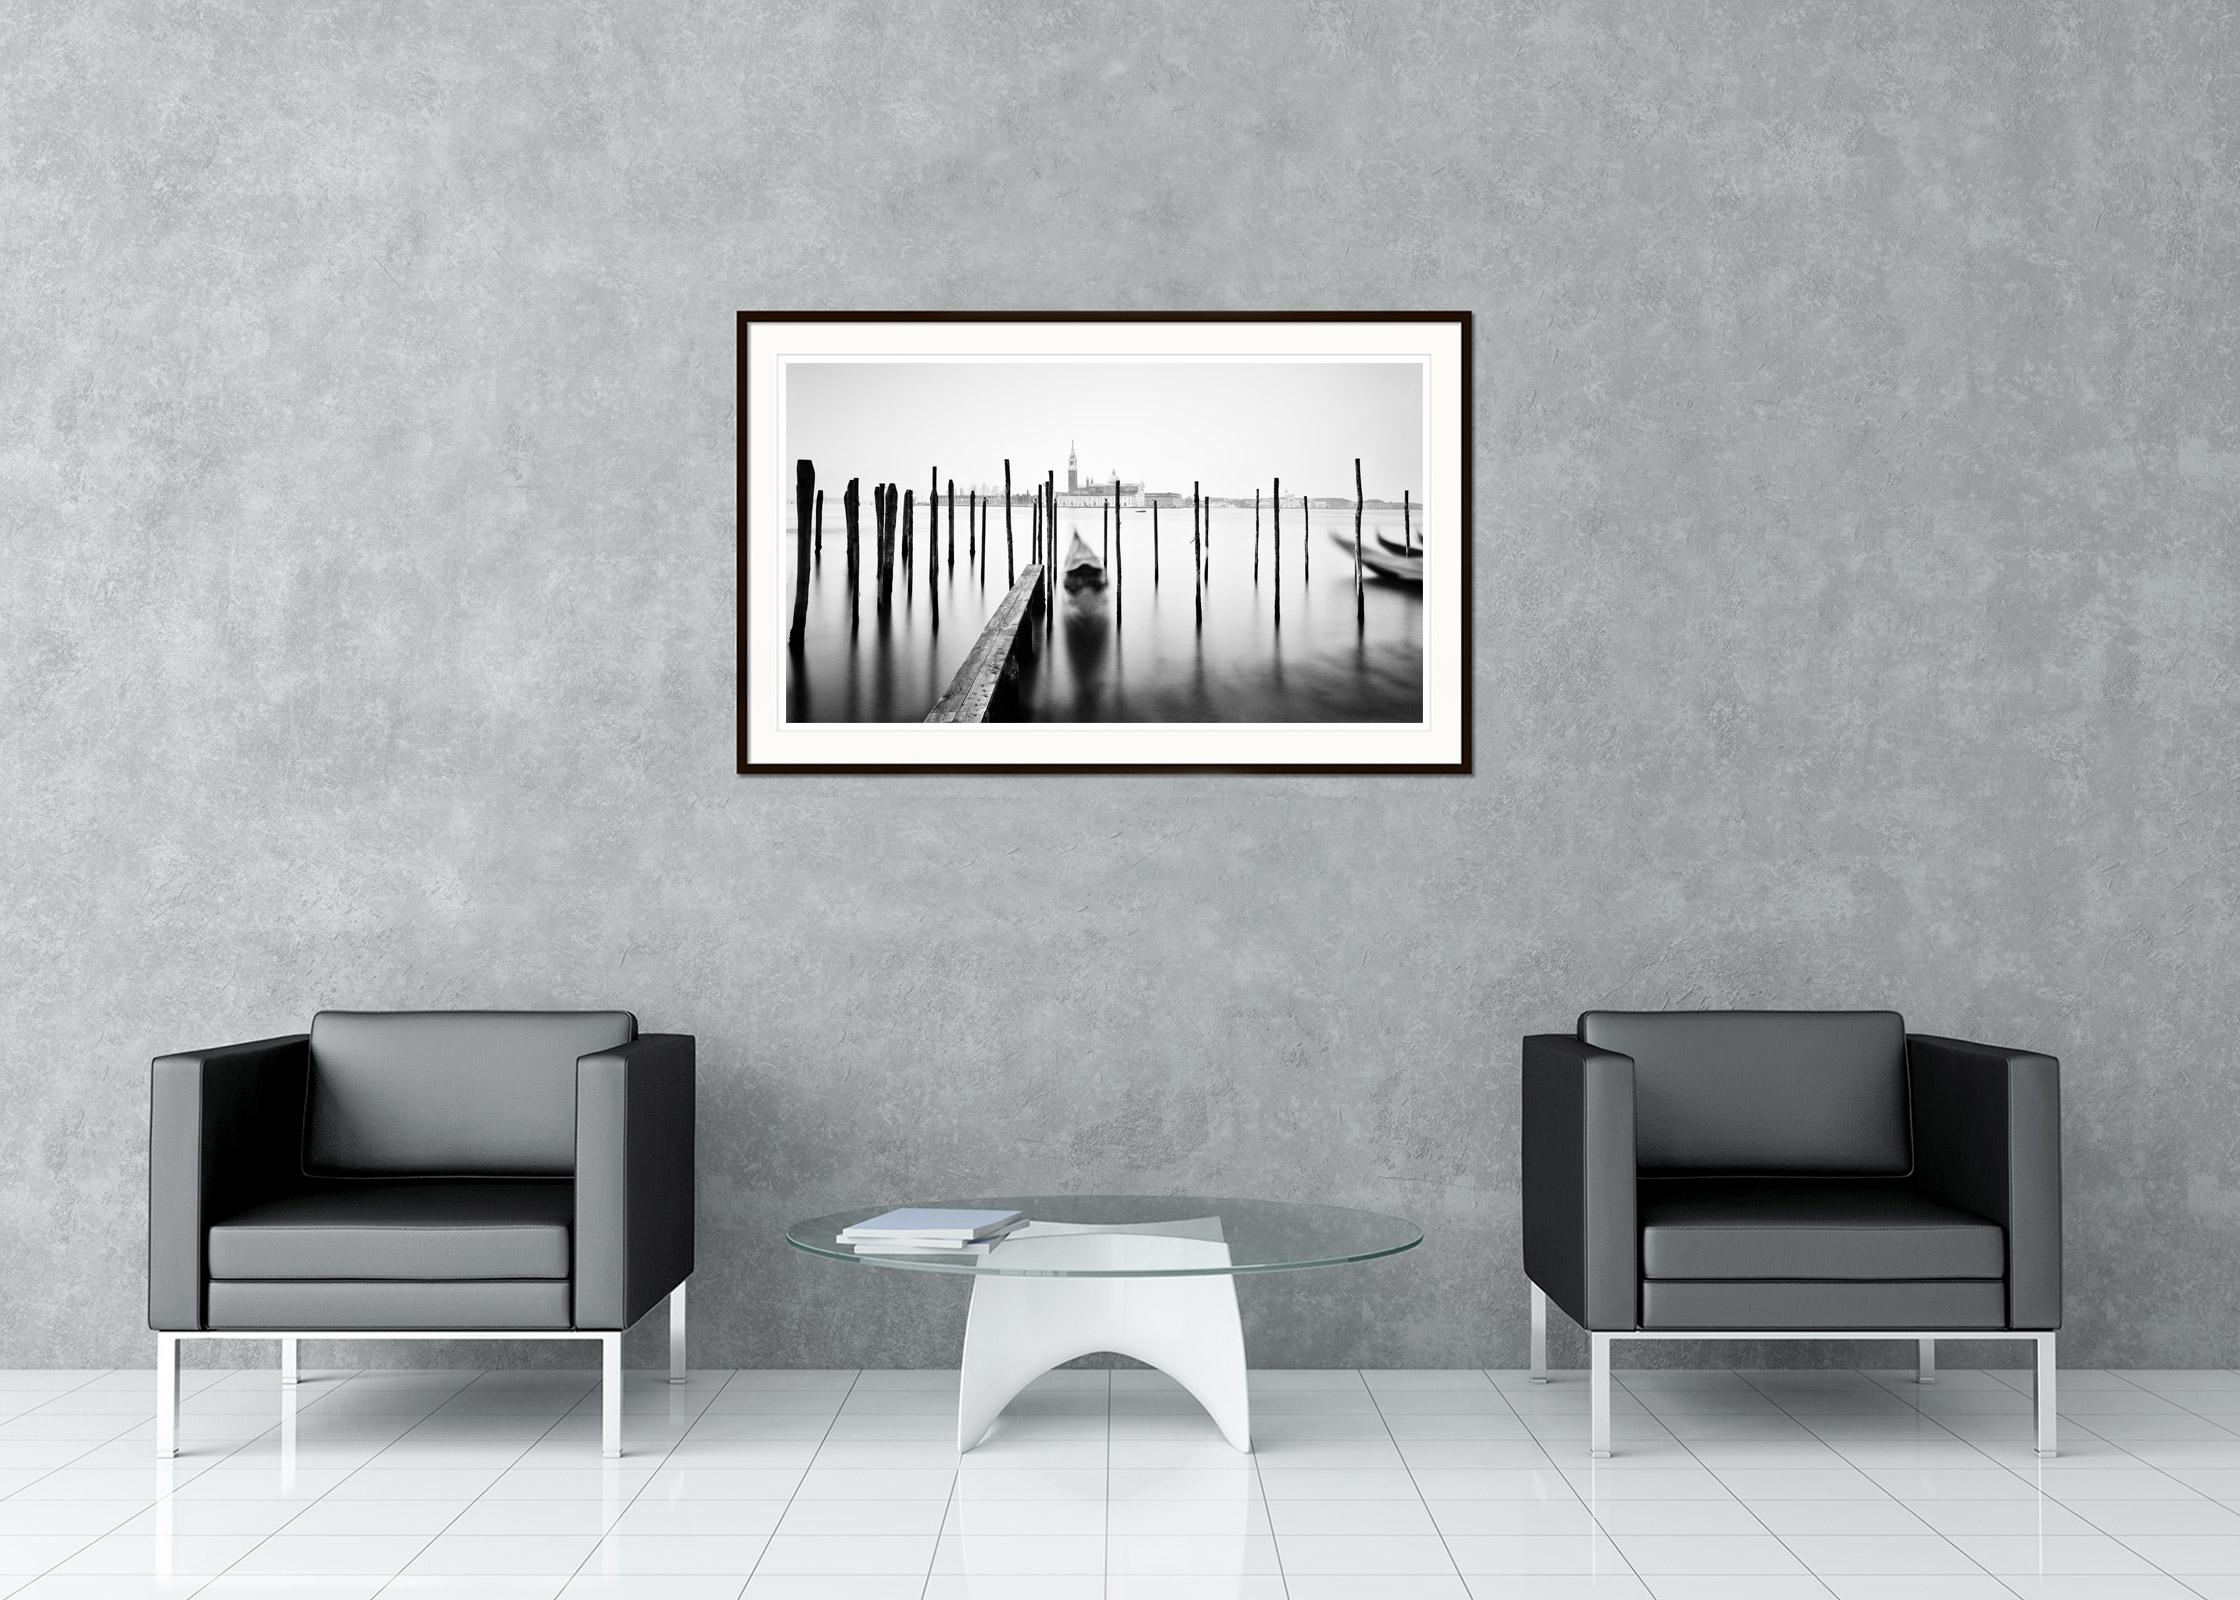 Black and white fine art long exposure waterscape - landscape photography. Archival pigment ink print as part of a limited edition of 15. All Gerald Berghammer prints are made to order in limited editions on Hahnemuehle Photo Rag Baryta. Each print